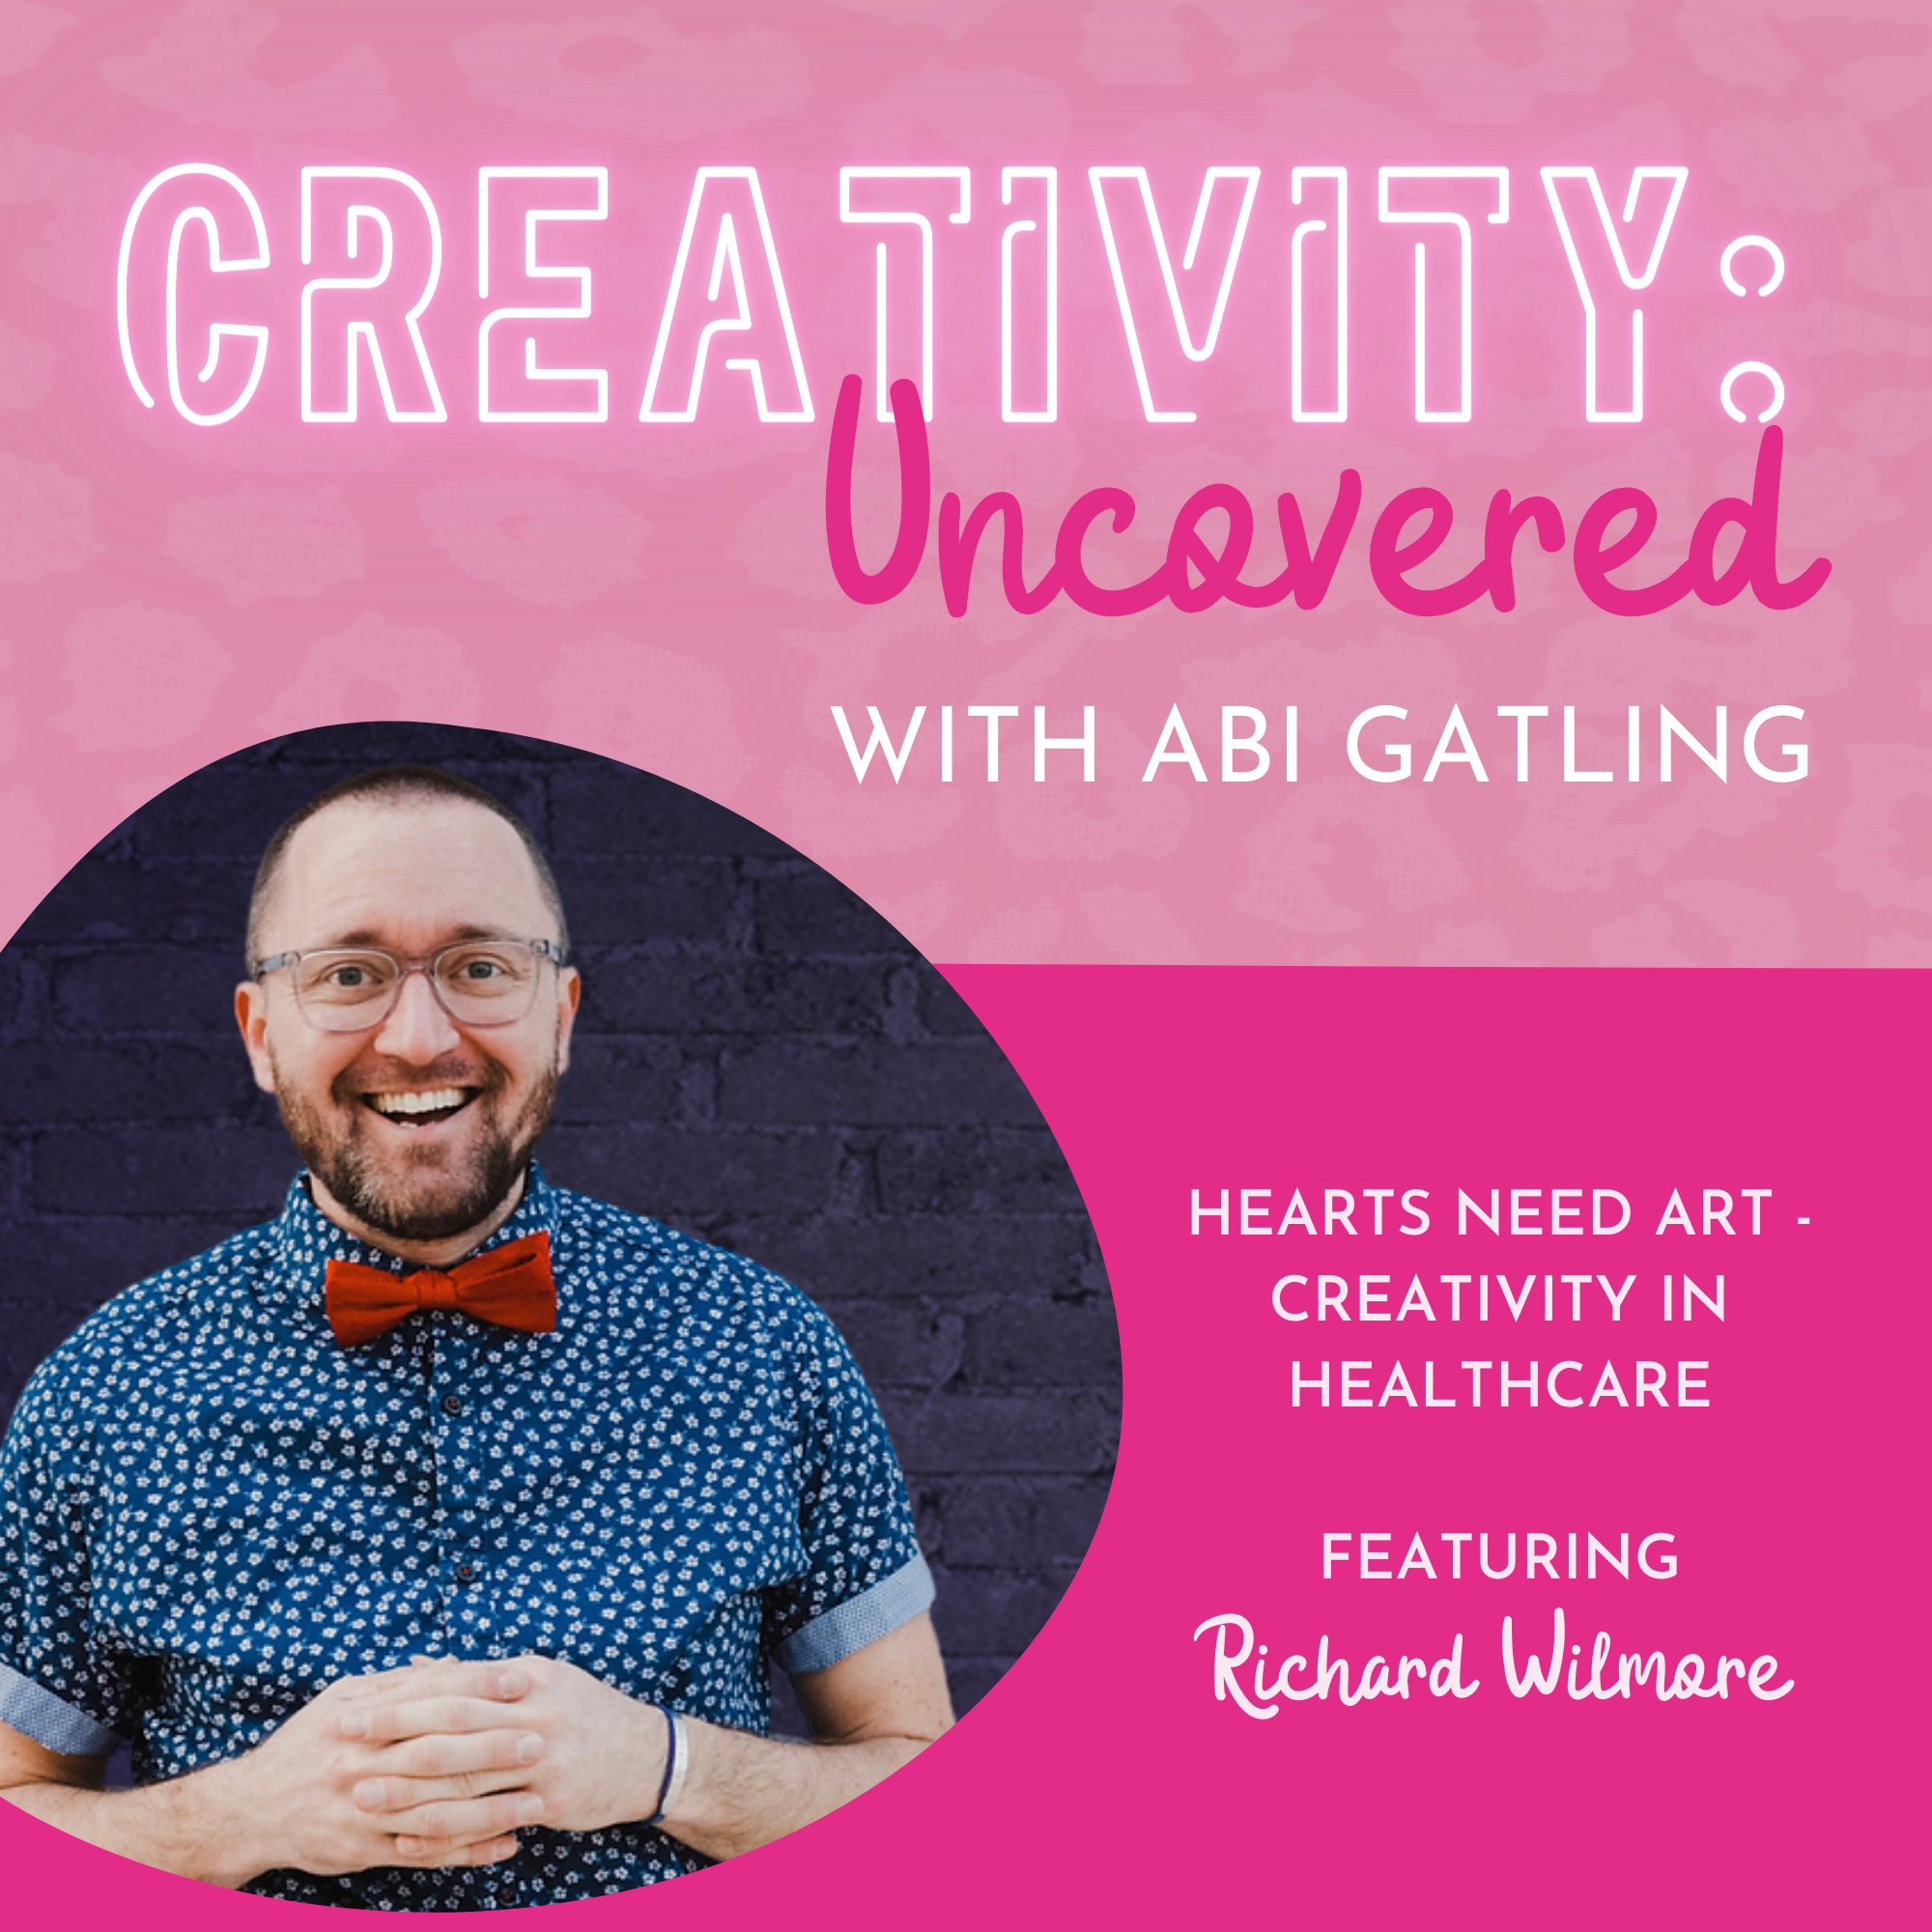 Creativity: Uncovered podcast episode graphic featuring guest Richard Wilmore